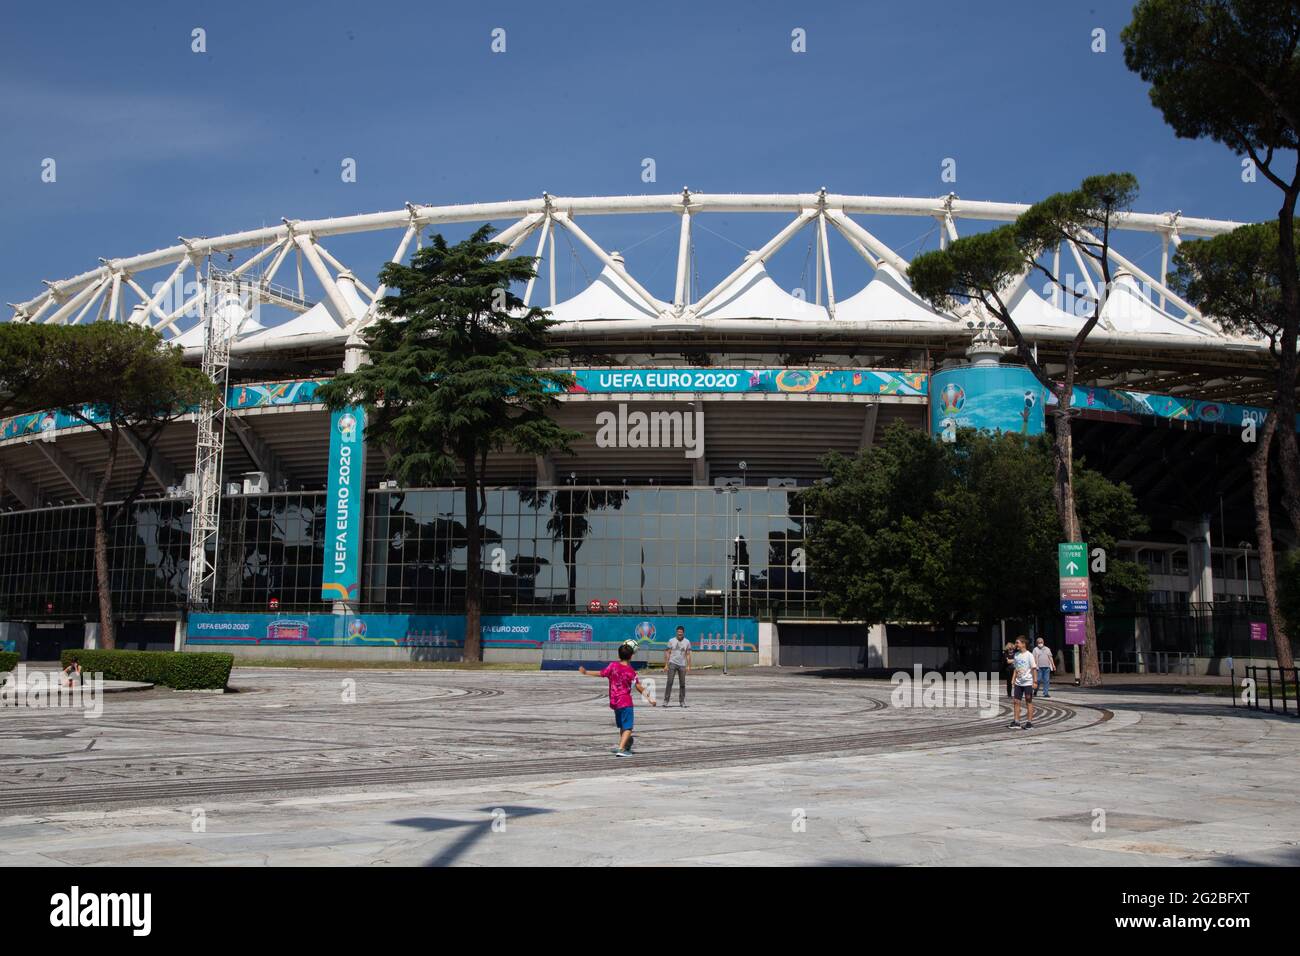 Rome, Italy. 10th June, 2021. Children play football in front of the Olympic Stadium in Rome. Olympic Stadium in Rome will host tomorrow evening, Friday 11 June 2021, inaugural match of European Football Championships, which should have been played in 2020 but, due to covid-19 pandemic, will be played this year (Photo by Matteo Nardone/Pacific Press) Credit: Pacific Press Media Production Corp./Alamy Live News Stock Photo